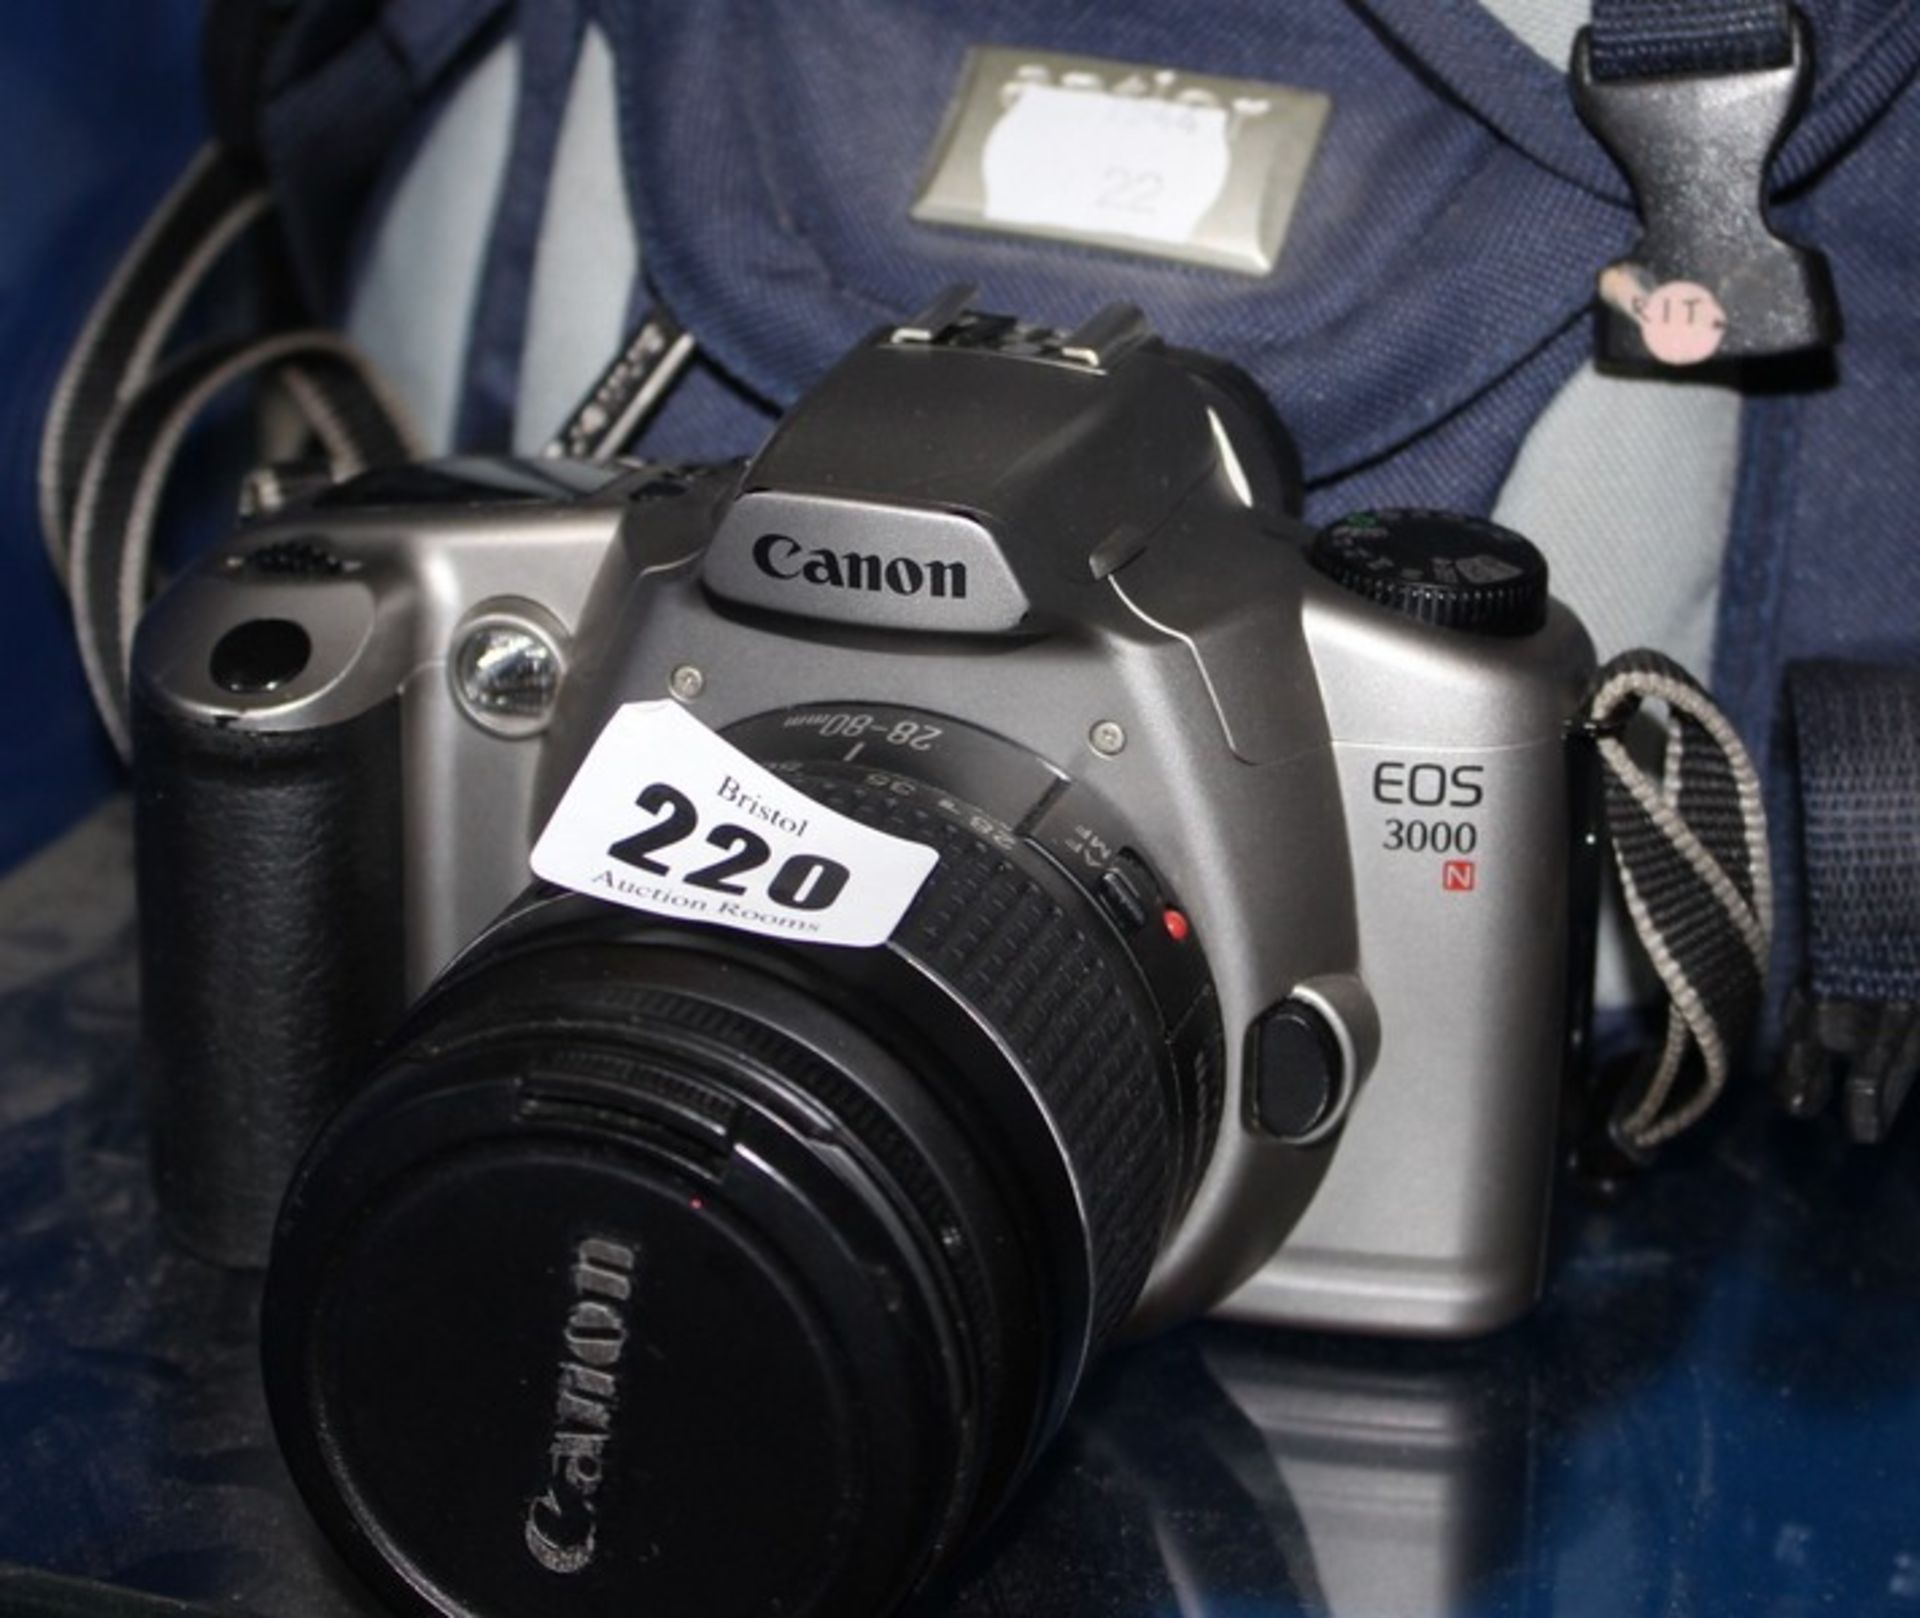 A Canon EOS3000 35mm camera with 28-80mm lens, 80-200mm lens and case.